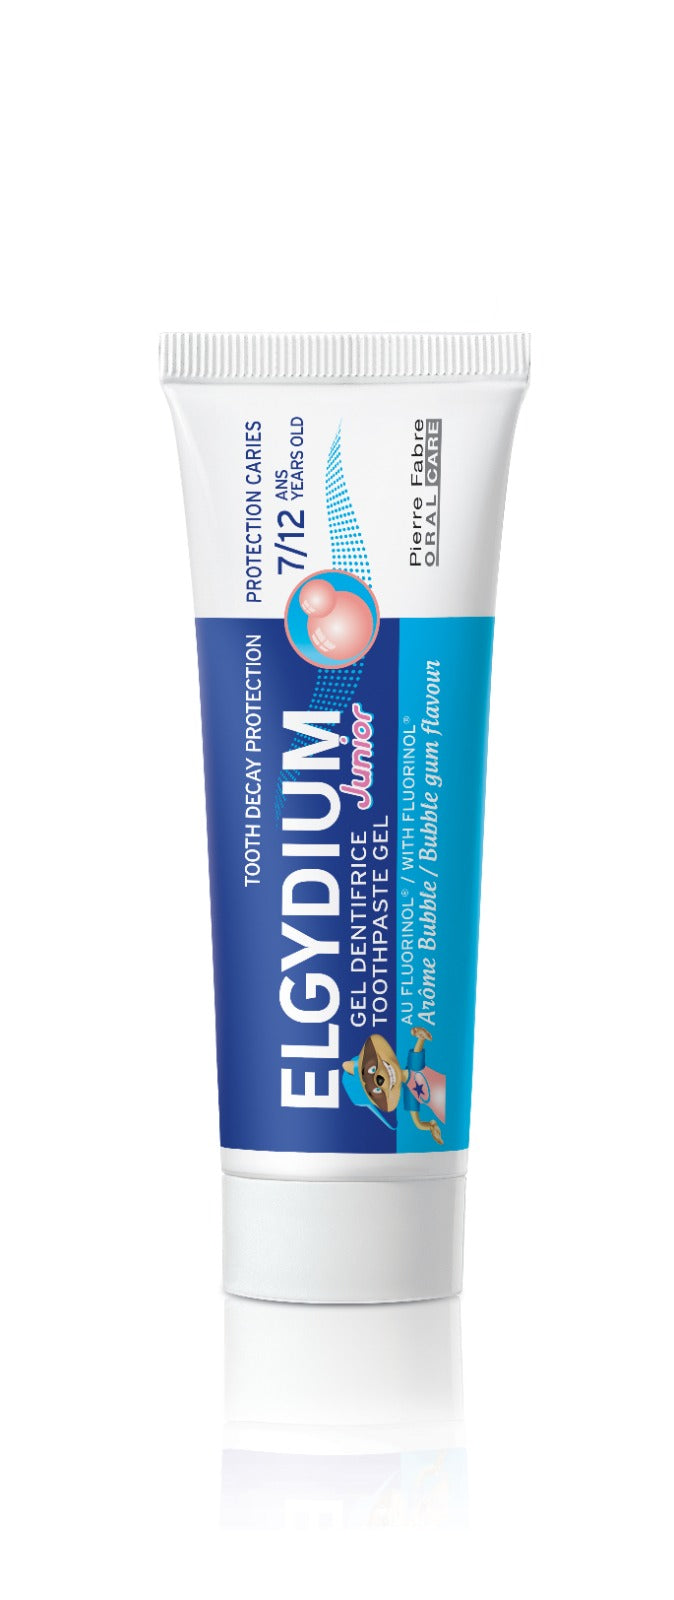 Elgydium Junior Bubble Gum 50ml Toothpaste - 100% Organic Flouride (7 Years Up) 1000ppm F-  (Paraben Free)  - FOC Elgydium Toothpaste travel size 7ml with every 4 tubes ordered  Exp: 04/23